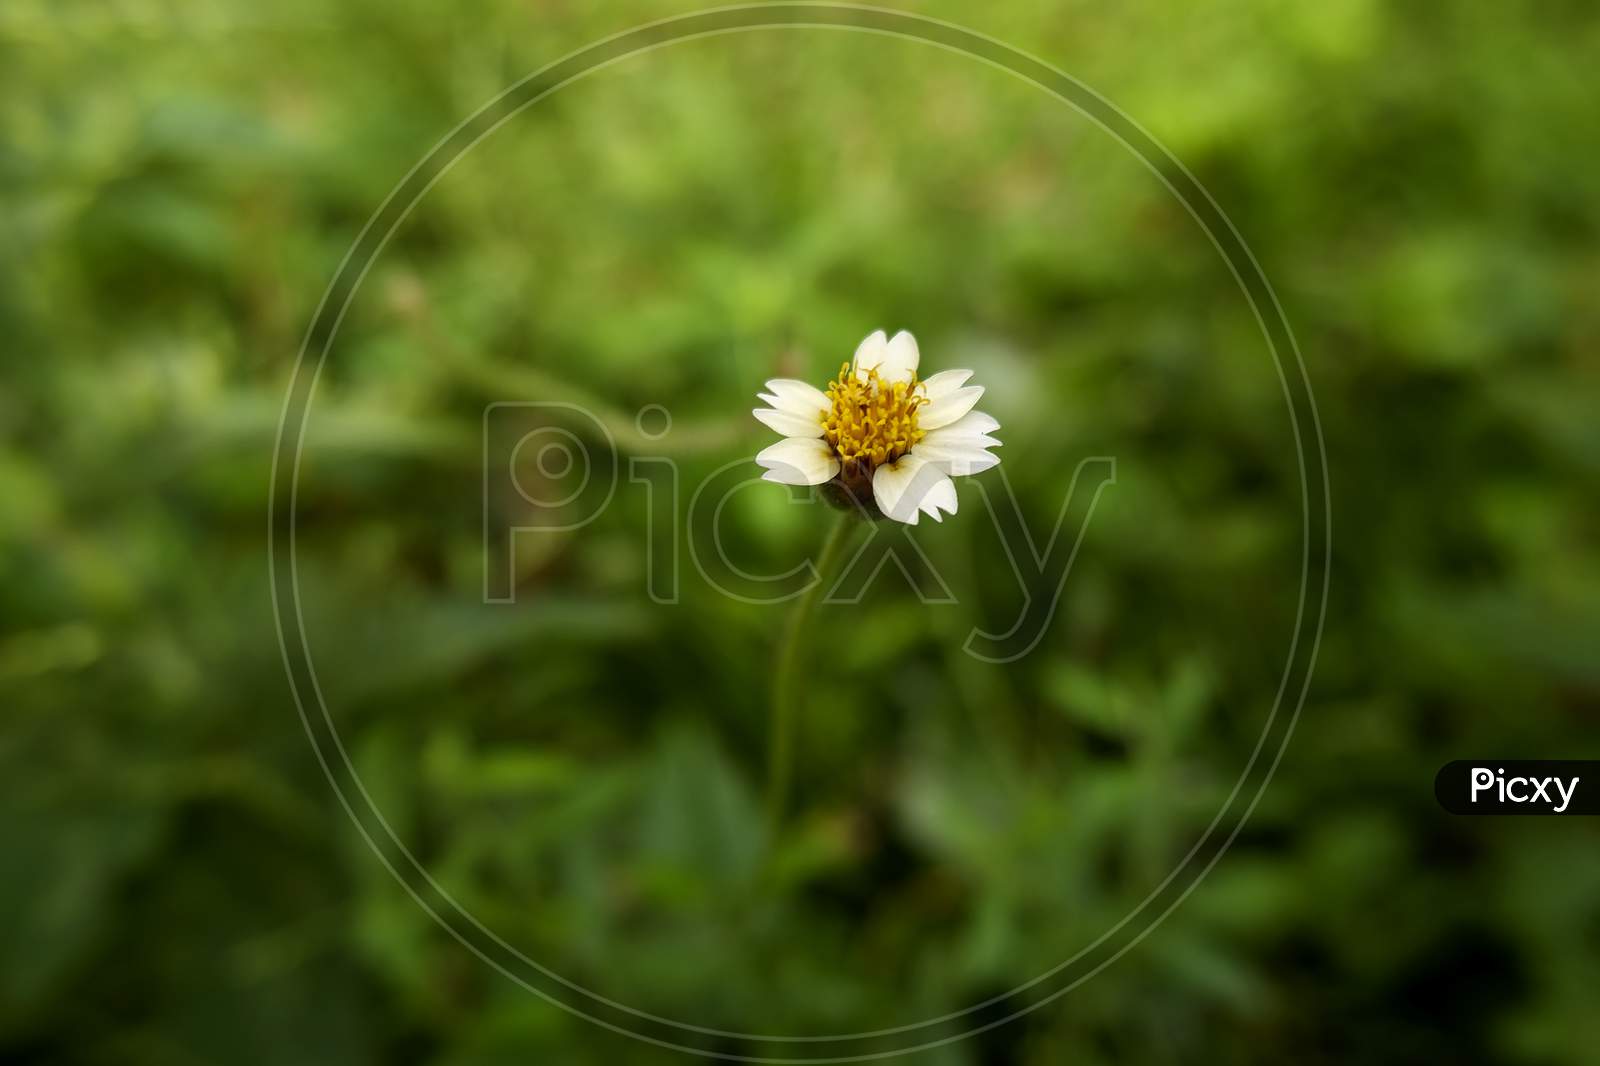 Closeup View Of Grass Flower Isolated In Field